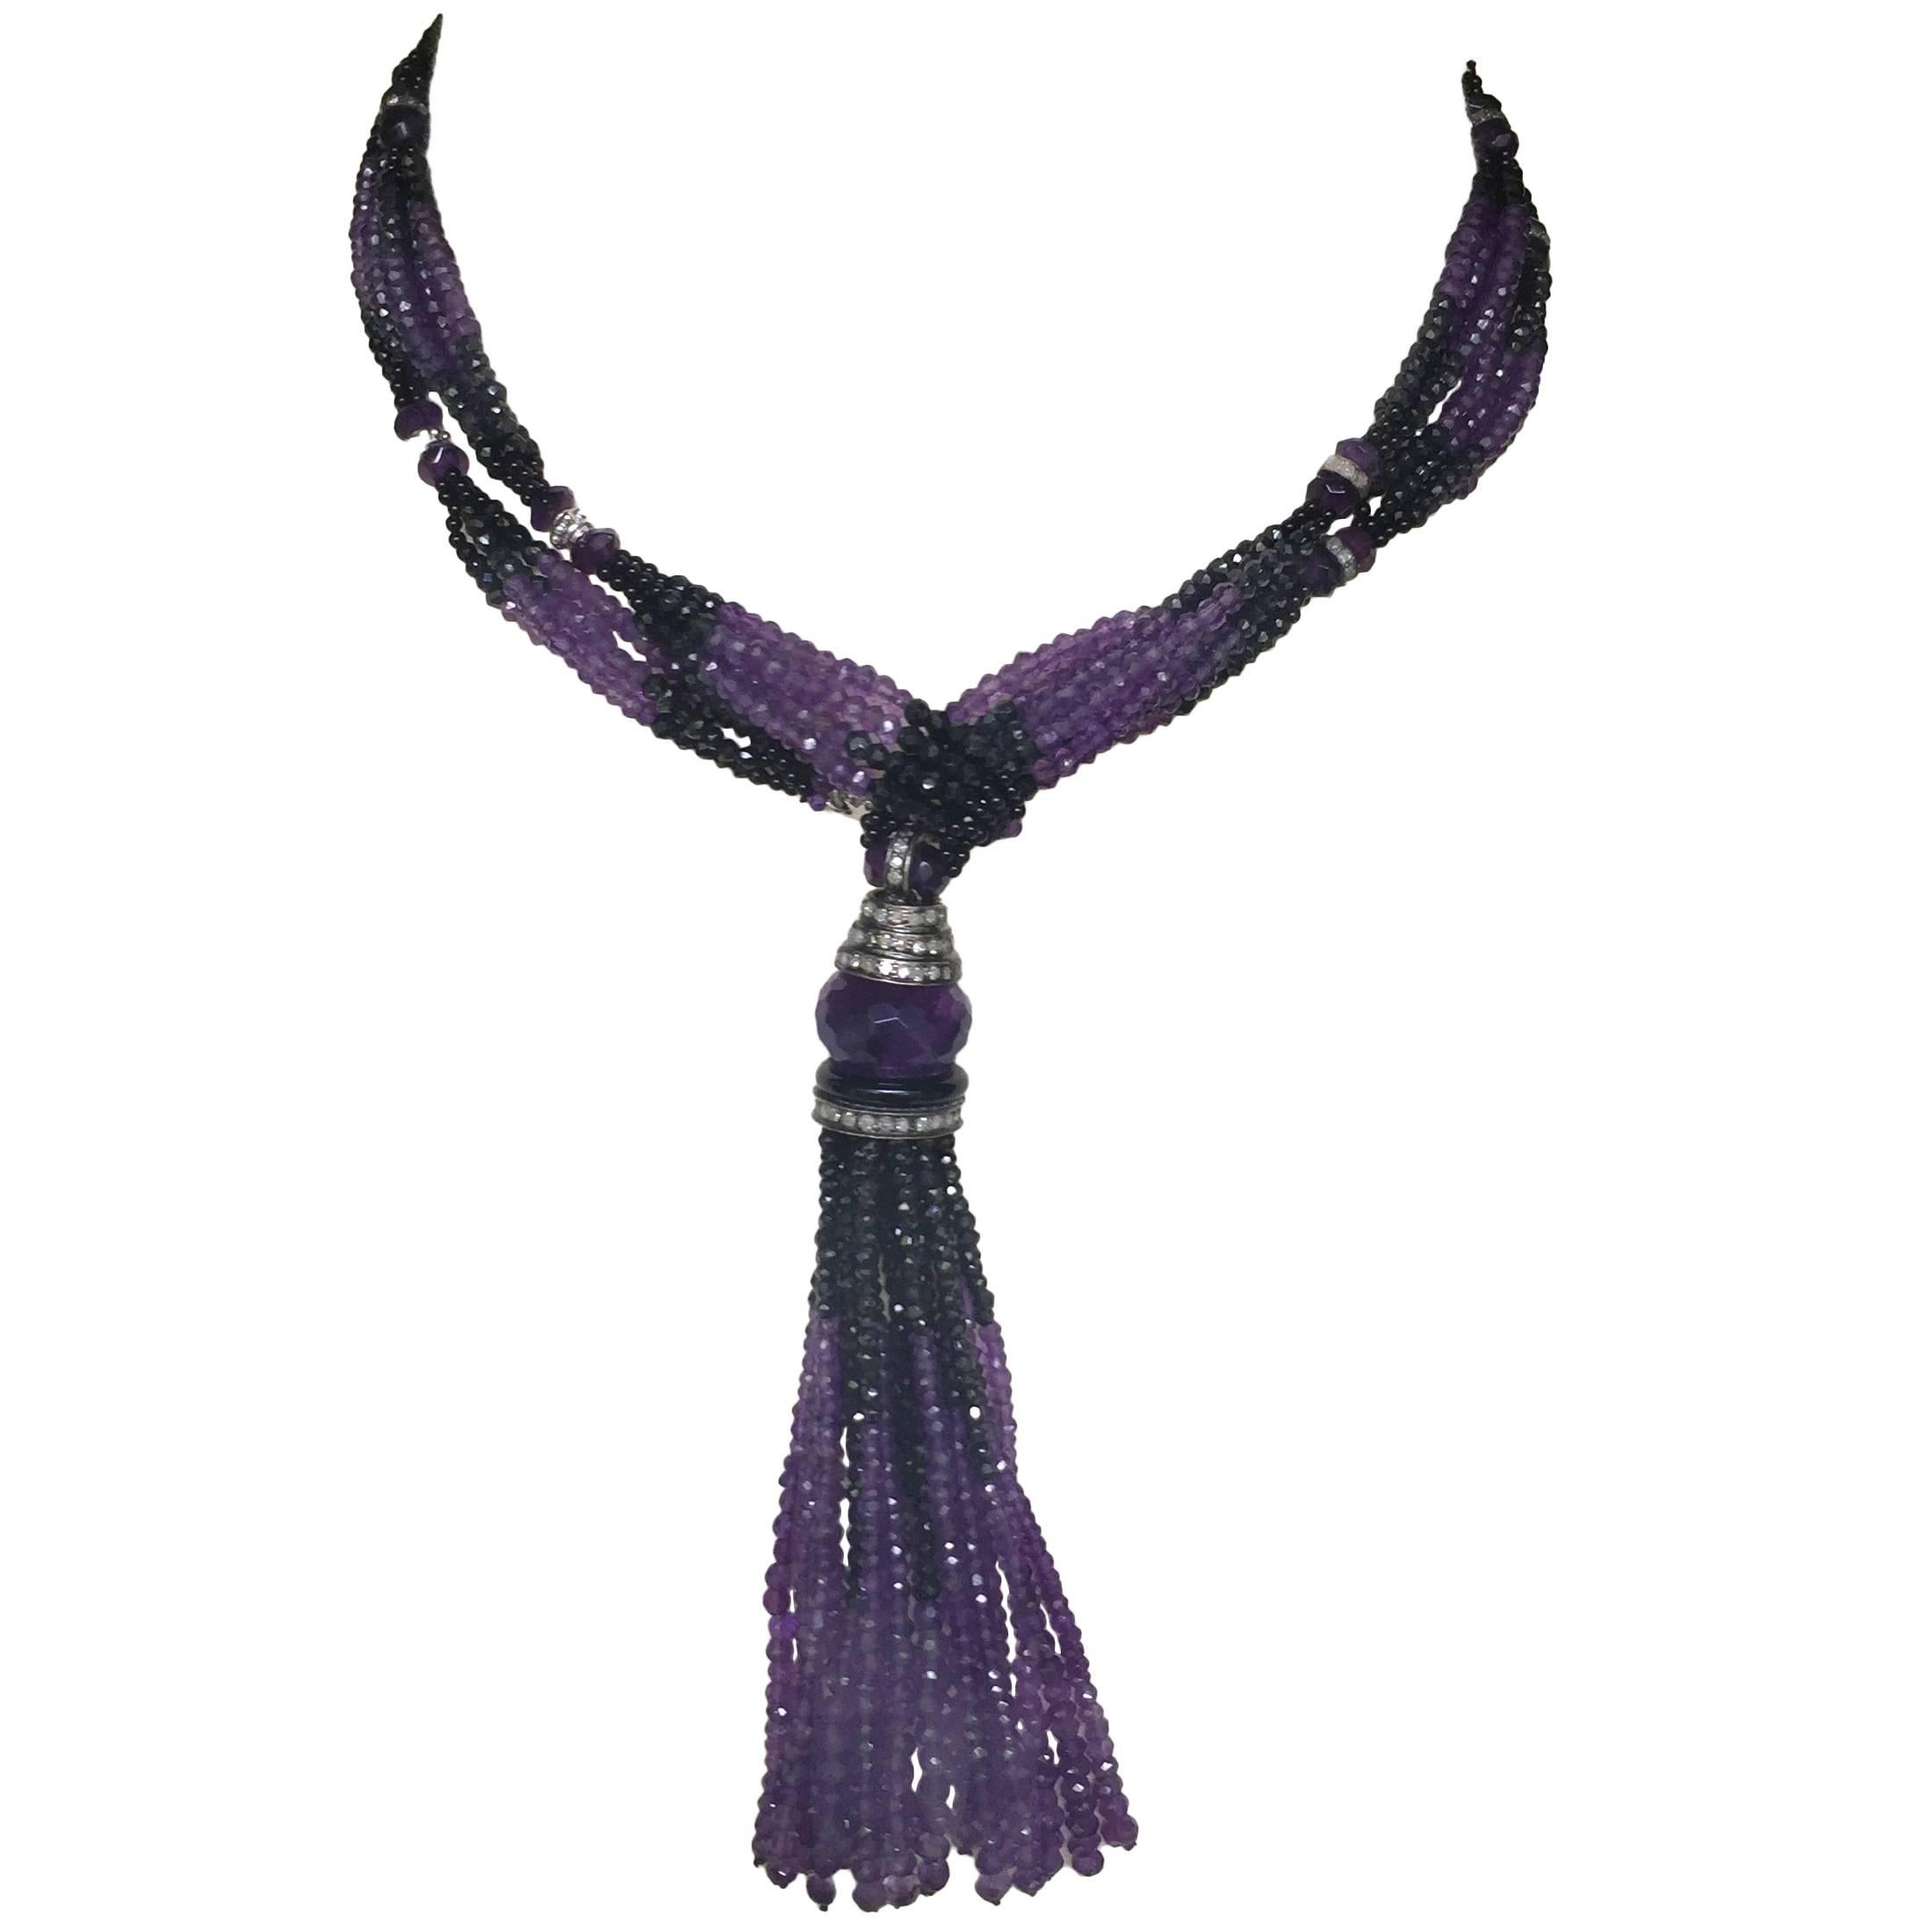 This graduated spinel and amethyst lariat necklace with diamonds and 14k white gold is a dramatic statement piece. The necklace has beautiful black spinel that flow into the amethyst beads in graduated sections. Slightly larger amethyst beads a